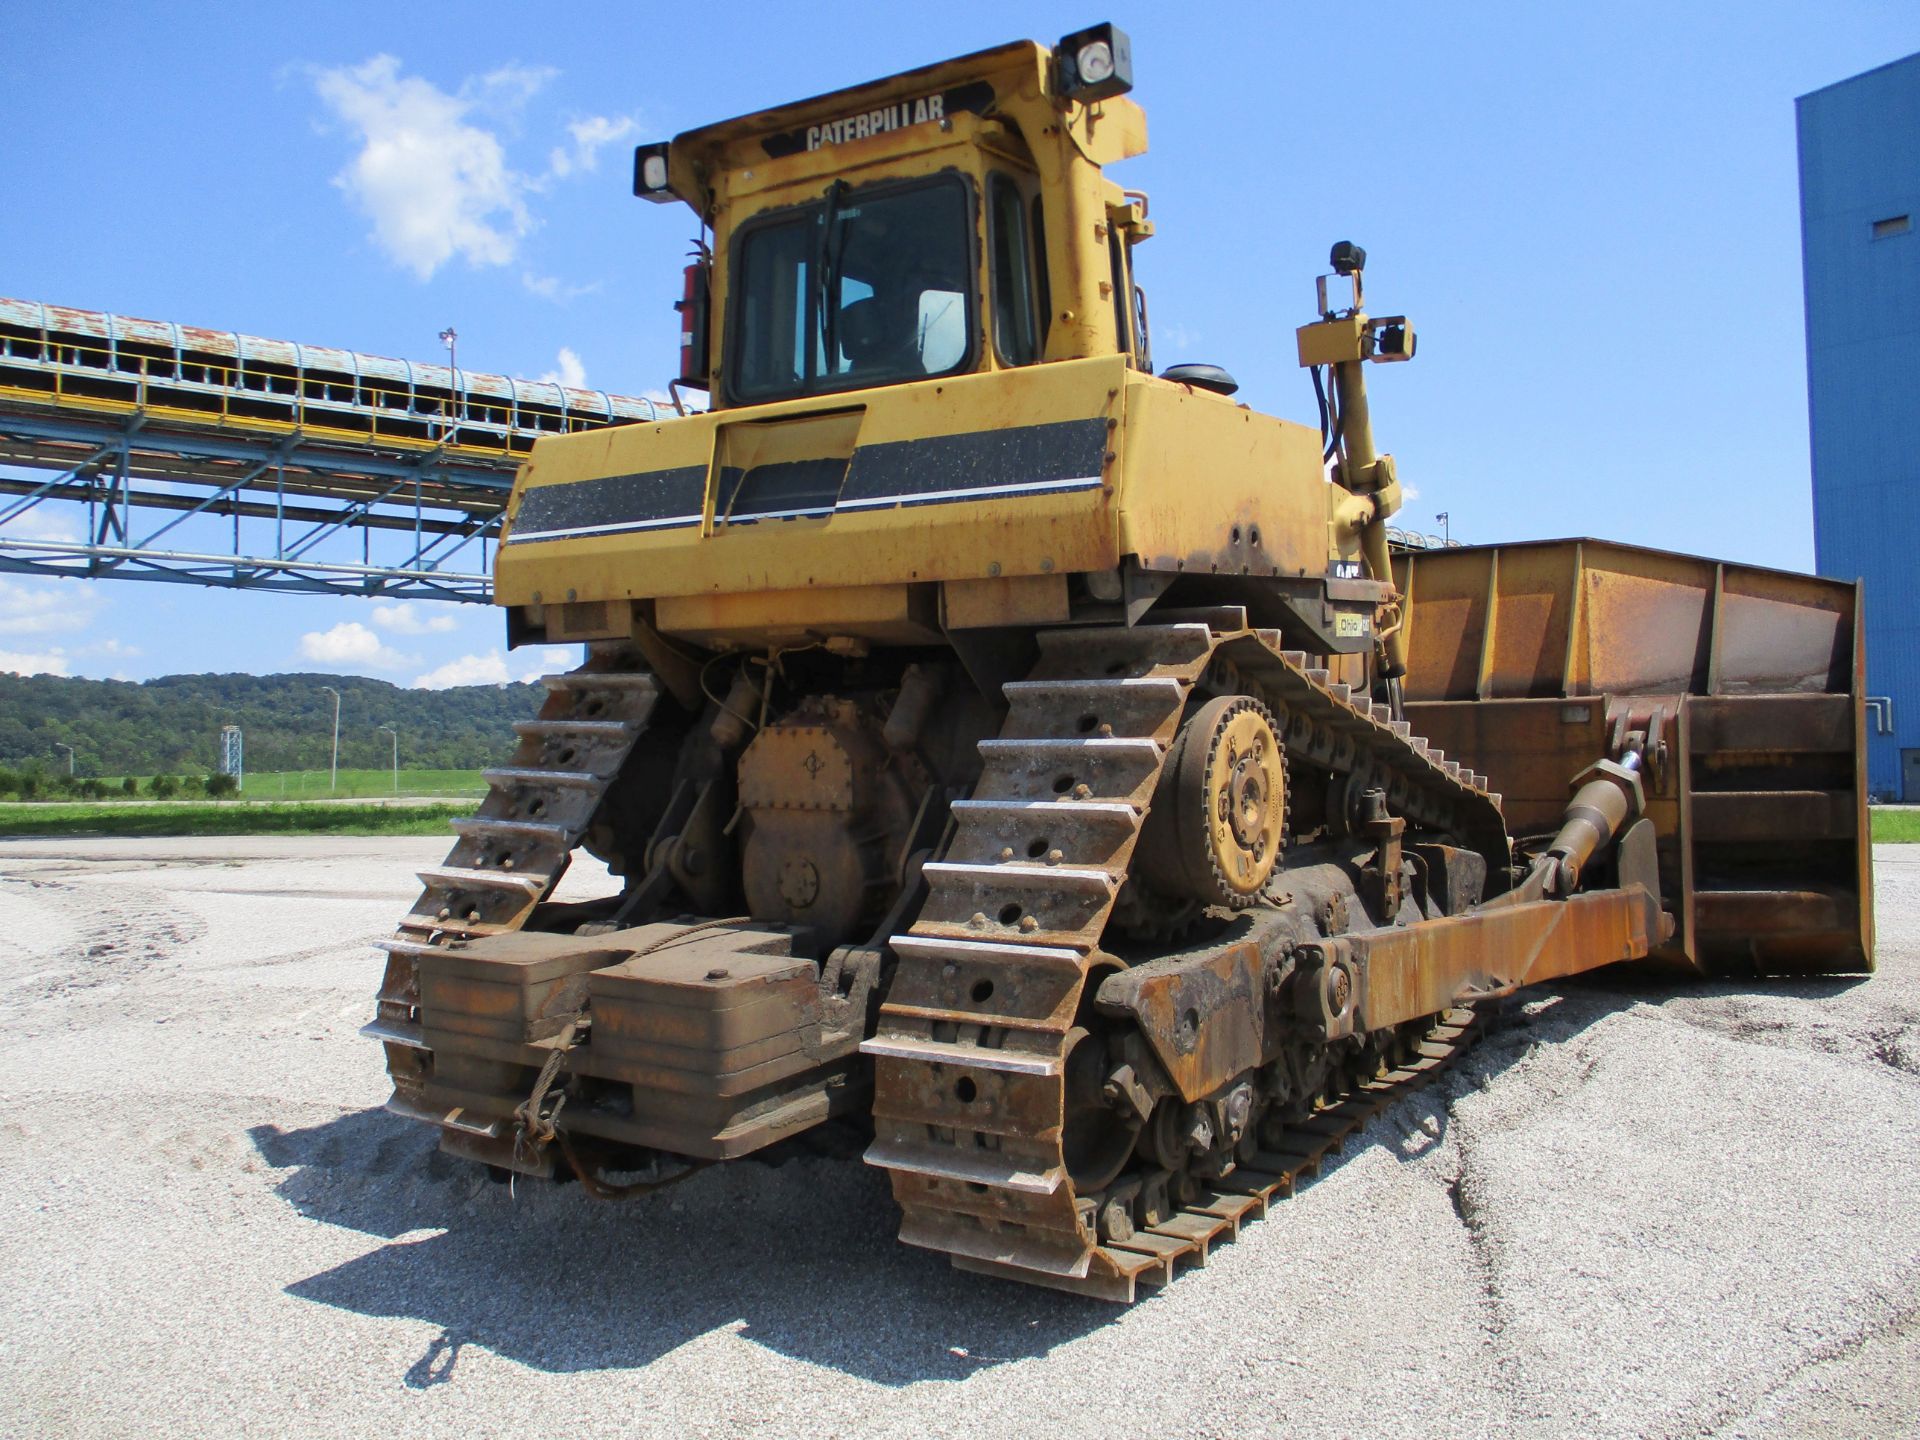 CATERPILLAR MODEL D9R INCLINE TRACK CRAWLER DOZER; S/N D9R-7TL00954, 16,868 HOURS - Image 7 of 11